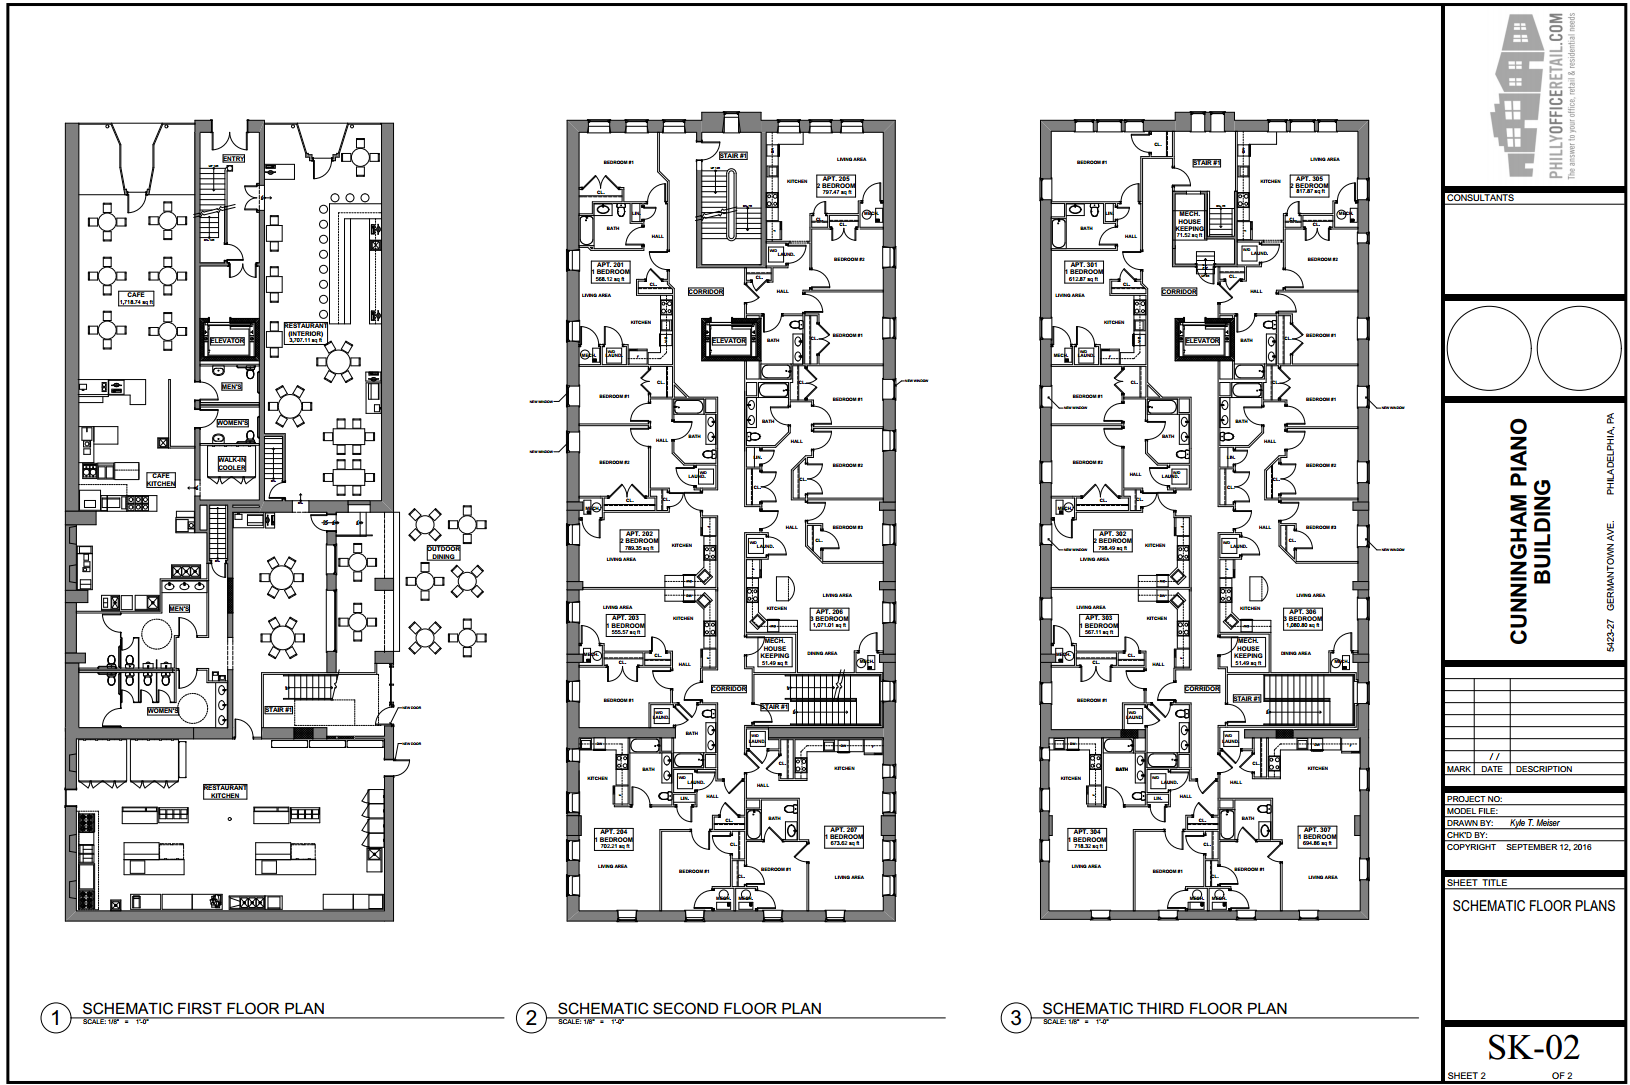 Cunningham Piano Building, Schematic Floor Plans | PhillyOfficeRetail, Sept. 2016